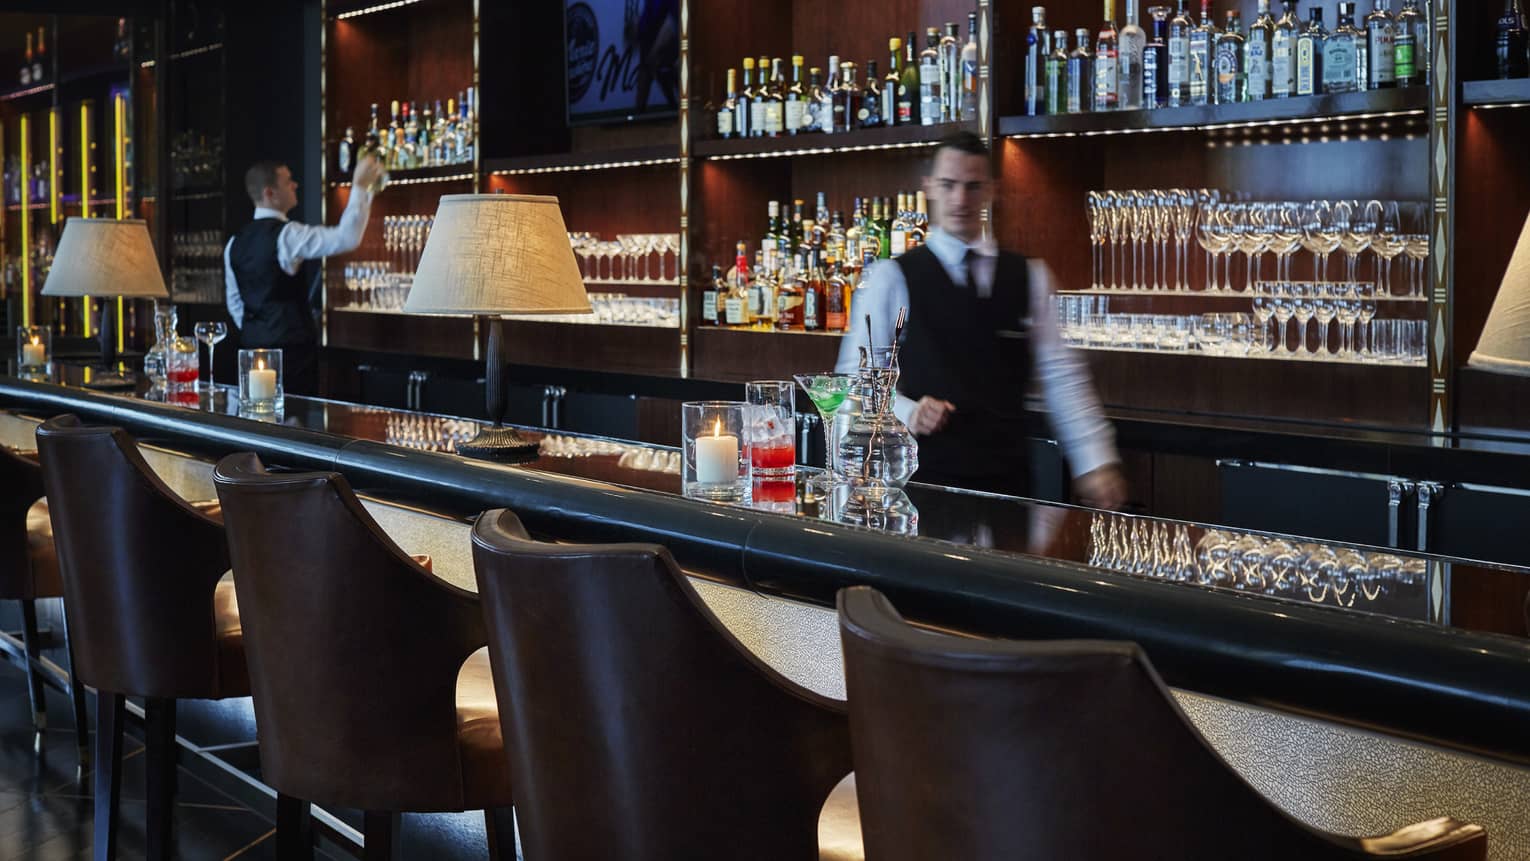 Bartender in black vest, white shirt, walks behind dimly-lit bar lined with leather bucket stools